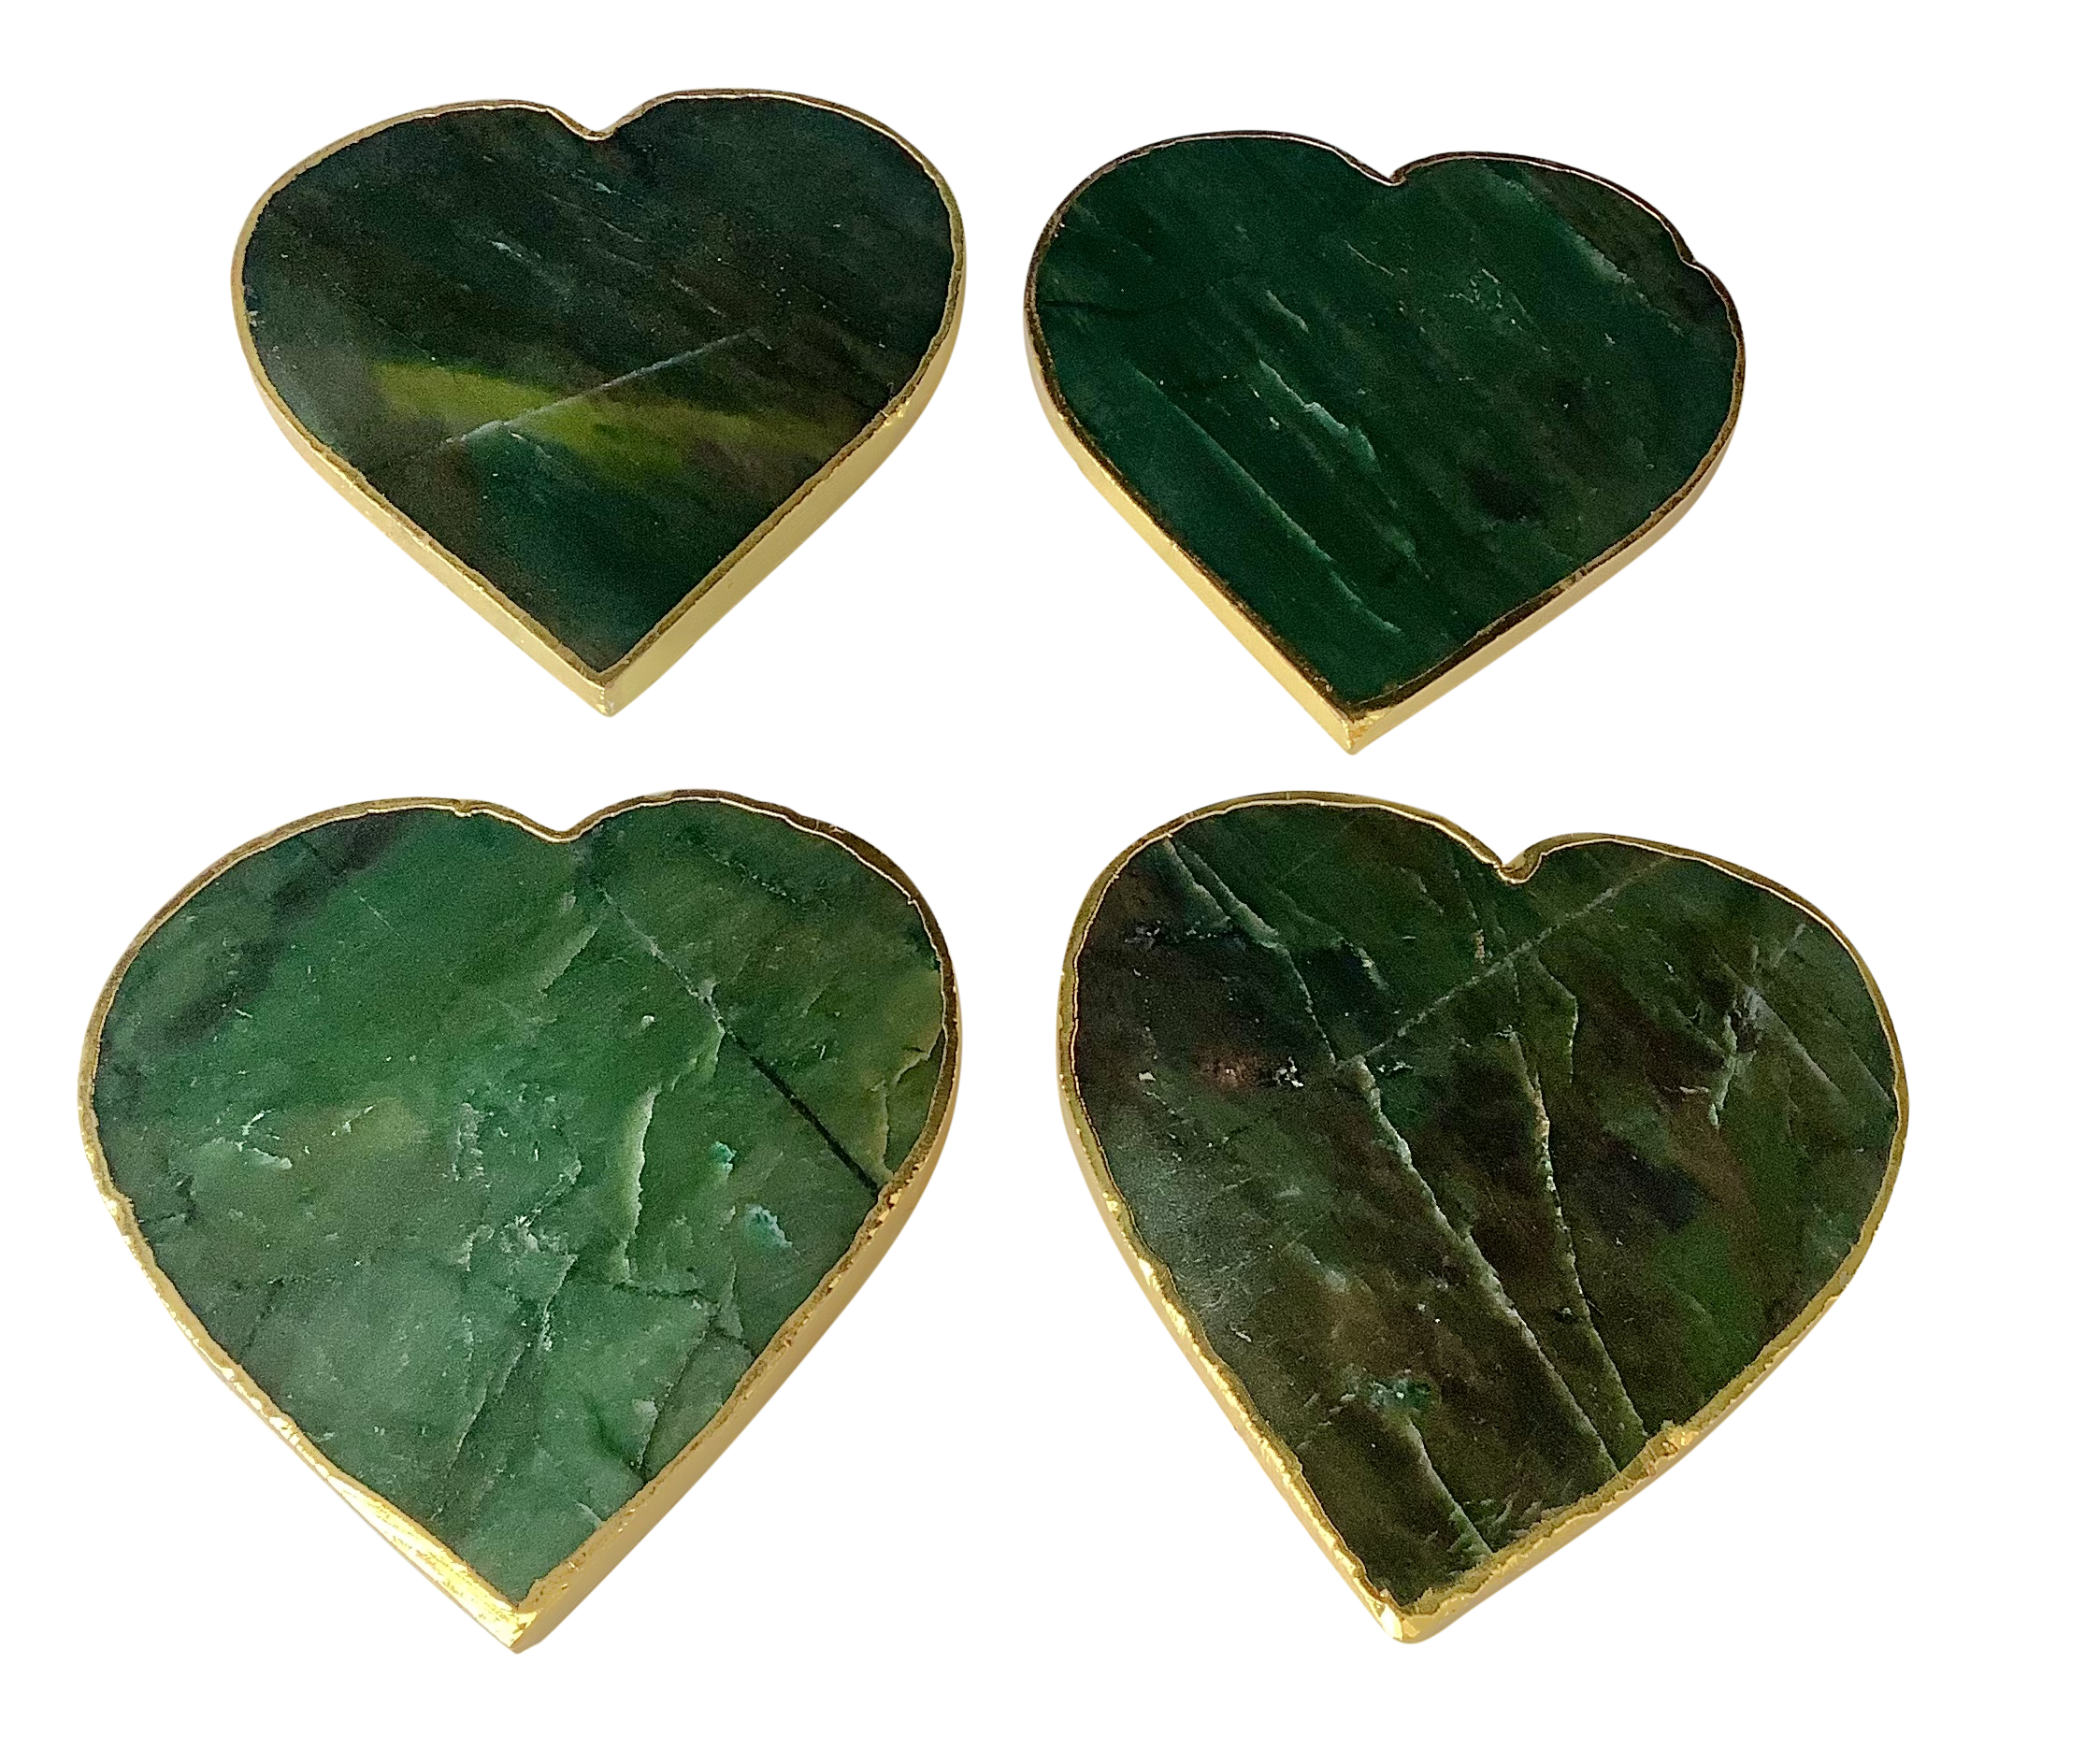 Blood Stone Crystal Coaster Heart Shaped 4 Pieces